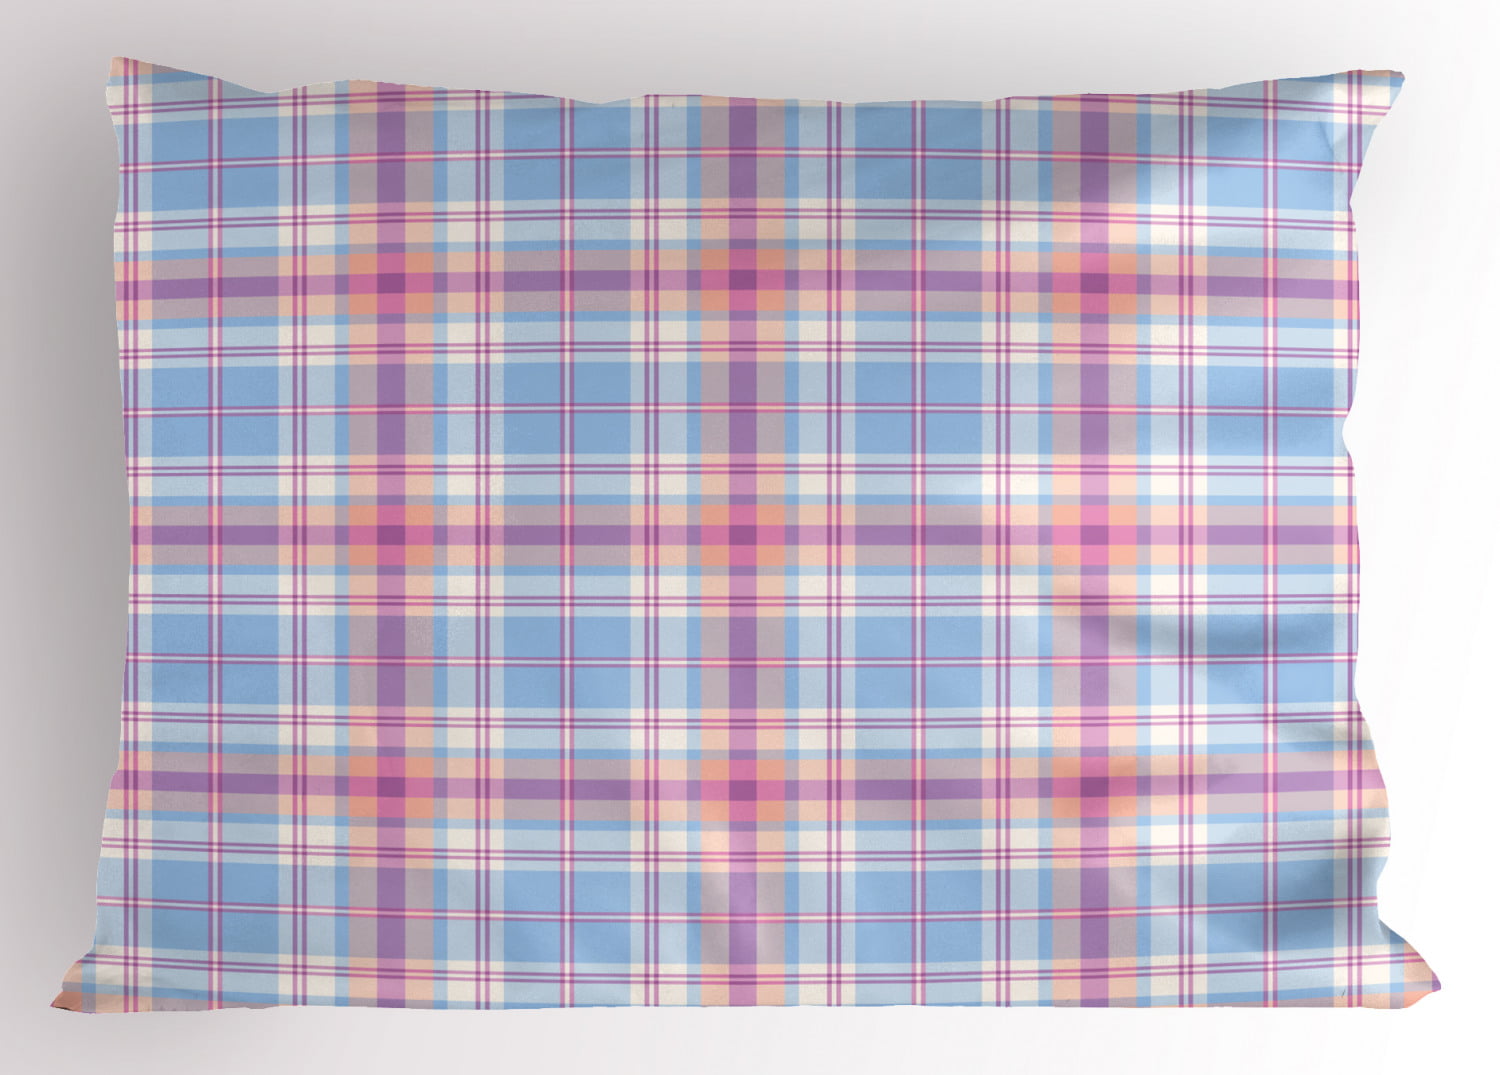 Checkerboard Plaid Blue Cosplay Print Roostery Pillow Sham 100% Cotton Sateen 26in x 26in Knife-Edge Sham 